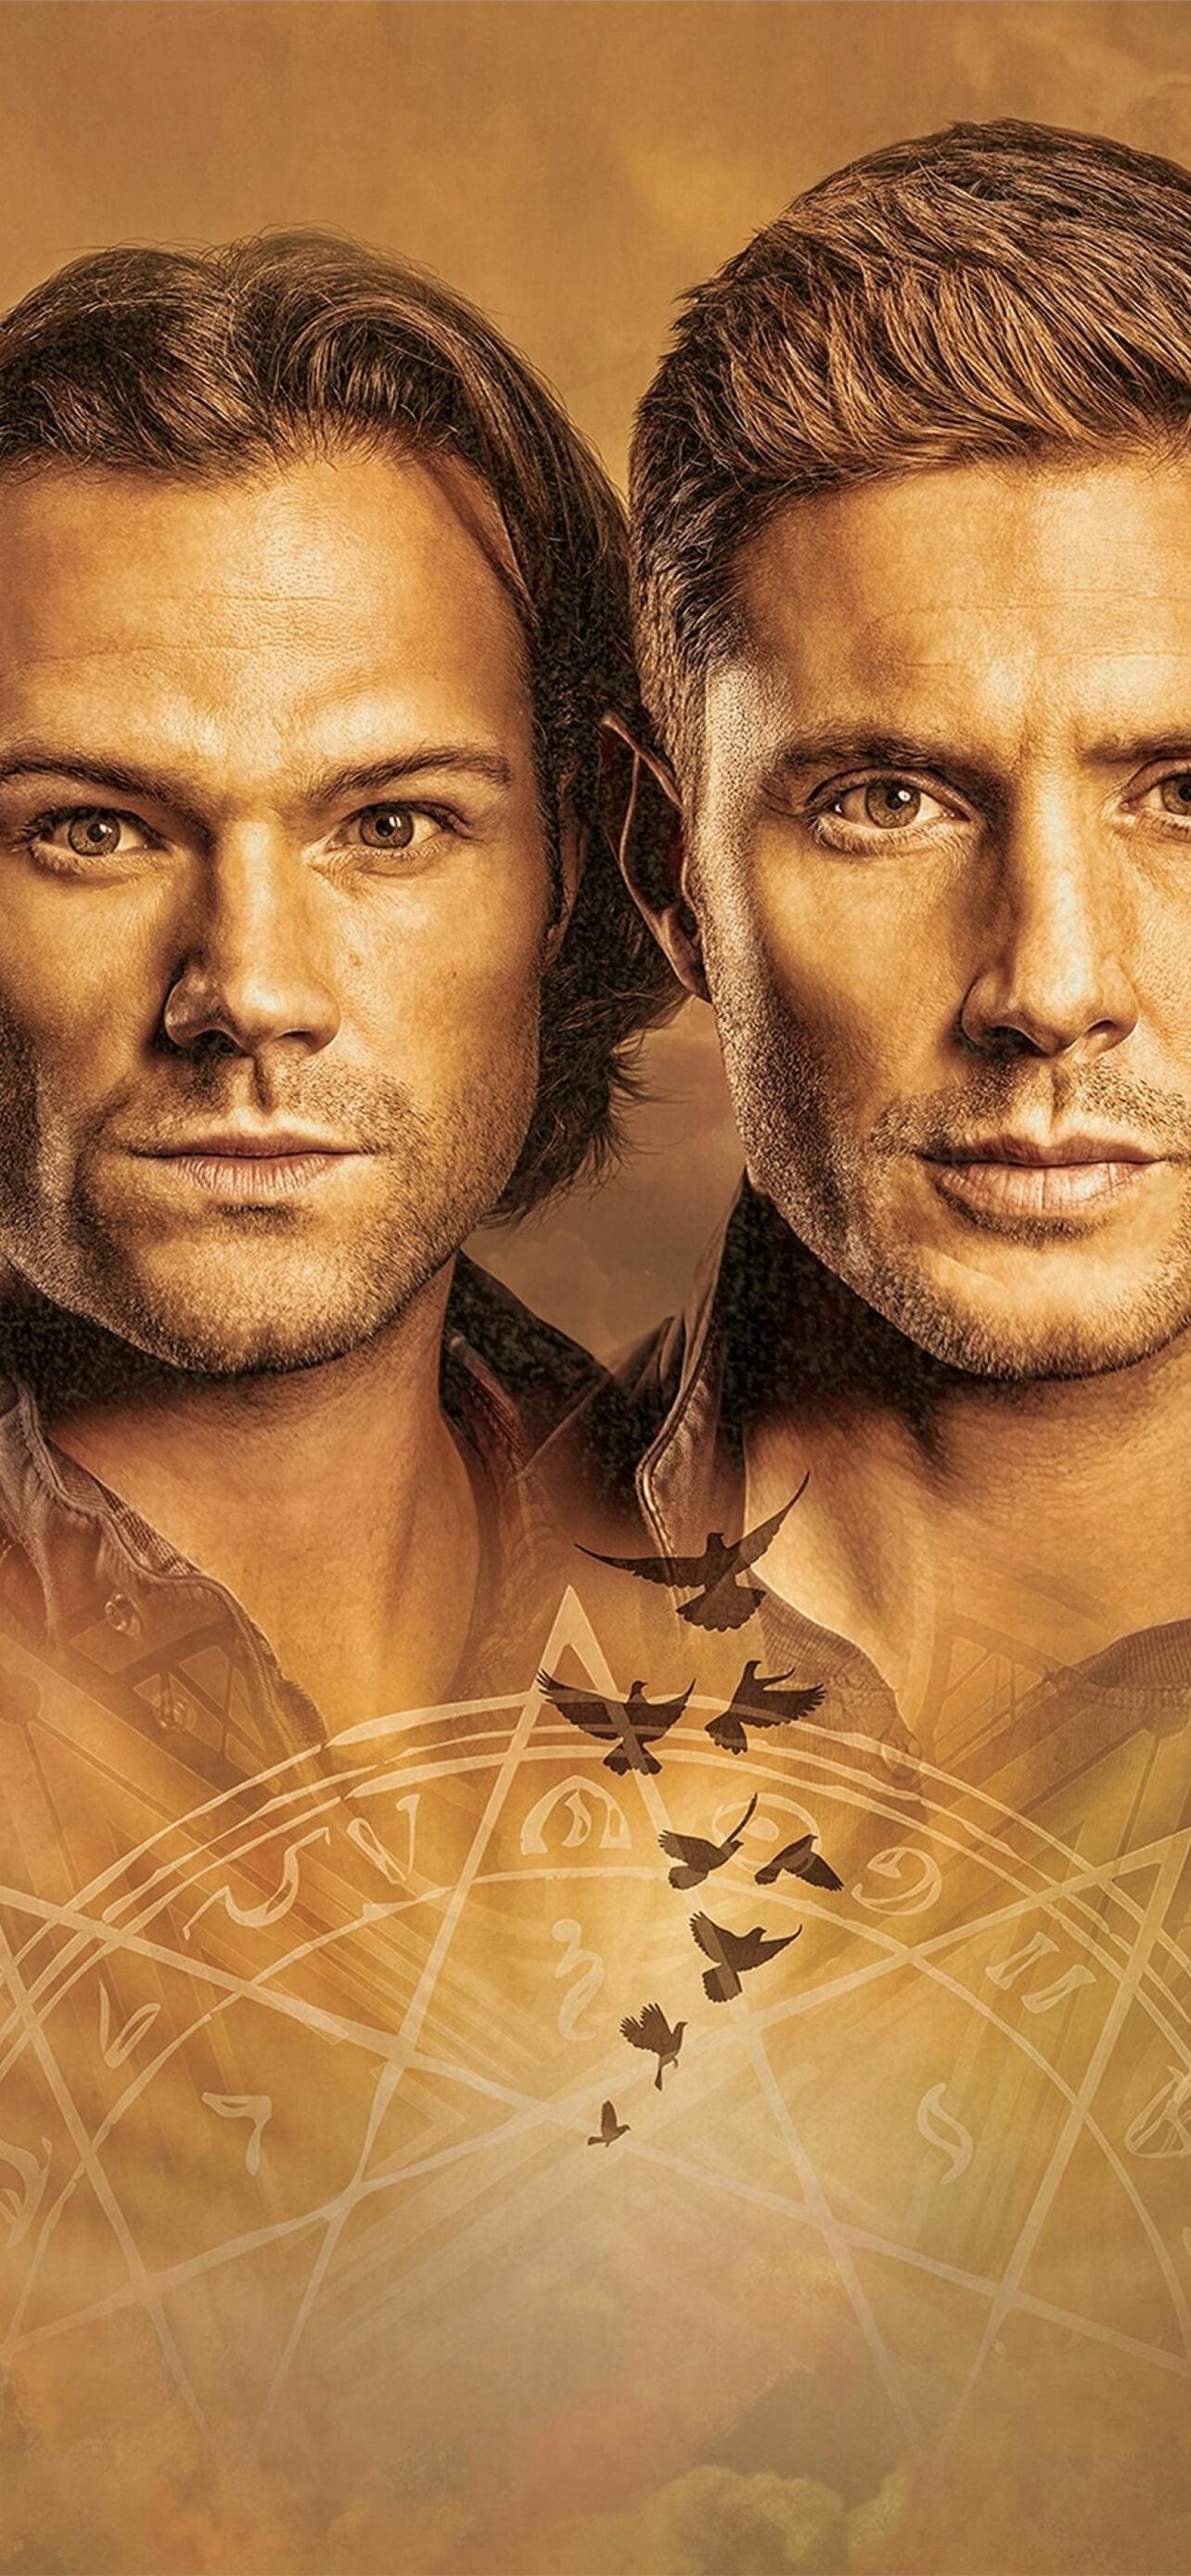 Supernatural: Brothers, Raised by their father as soldiers who track mysterious and demonic creatures. 1290x2780 HD Wallpaper.